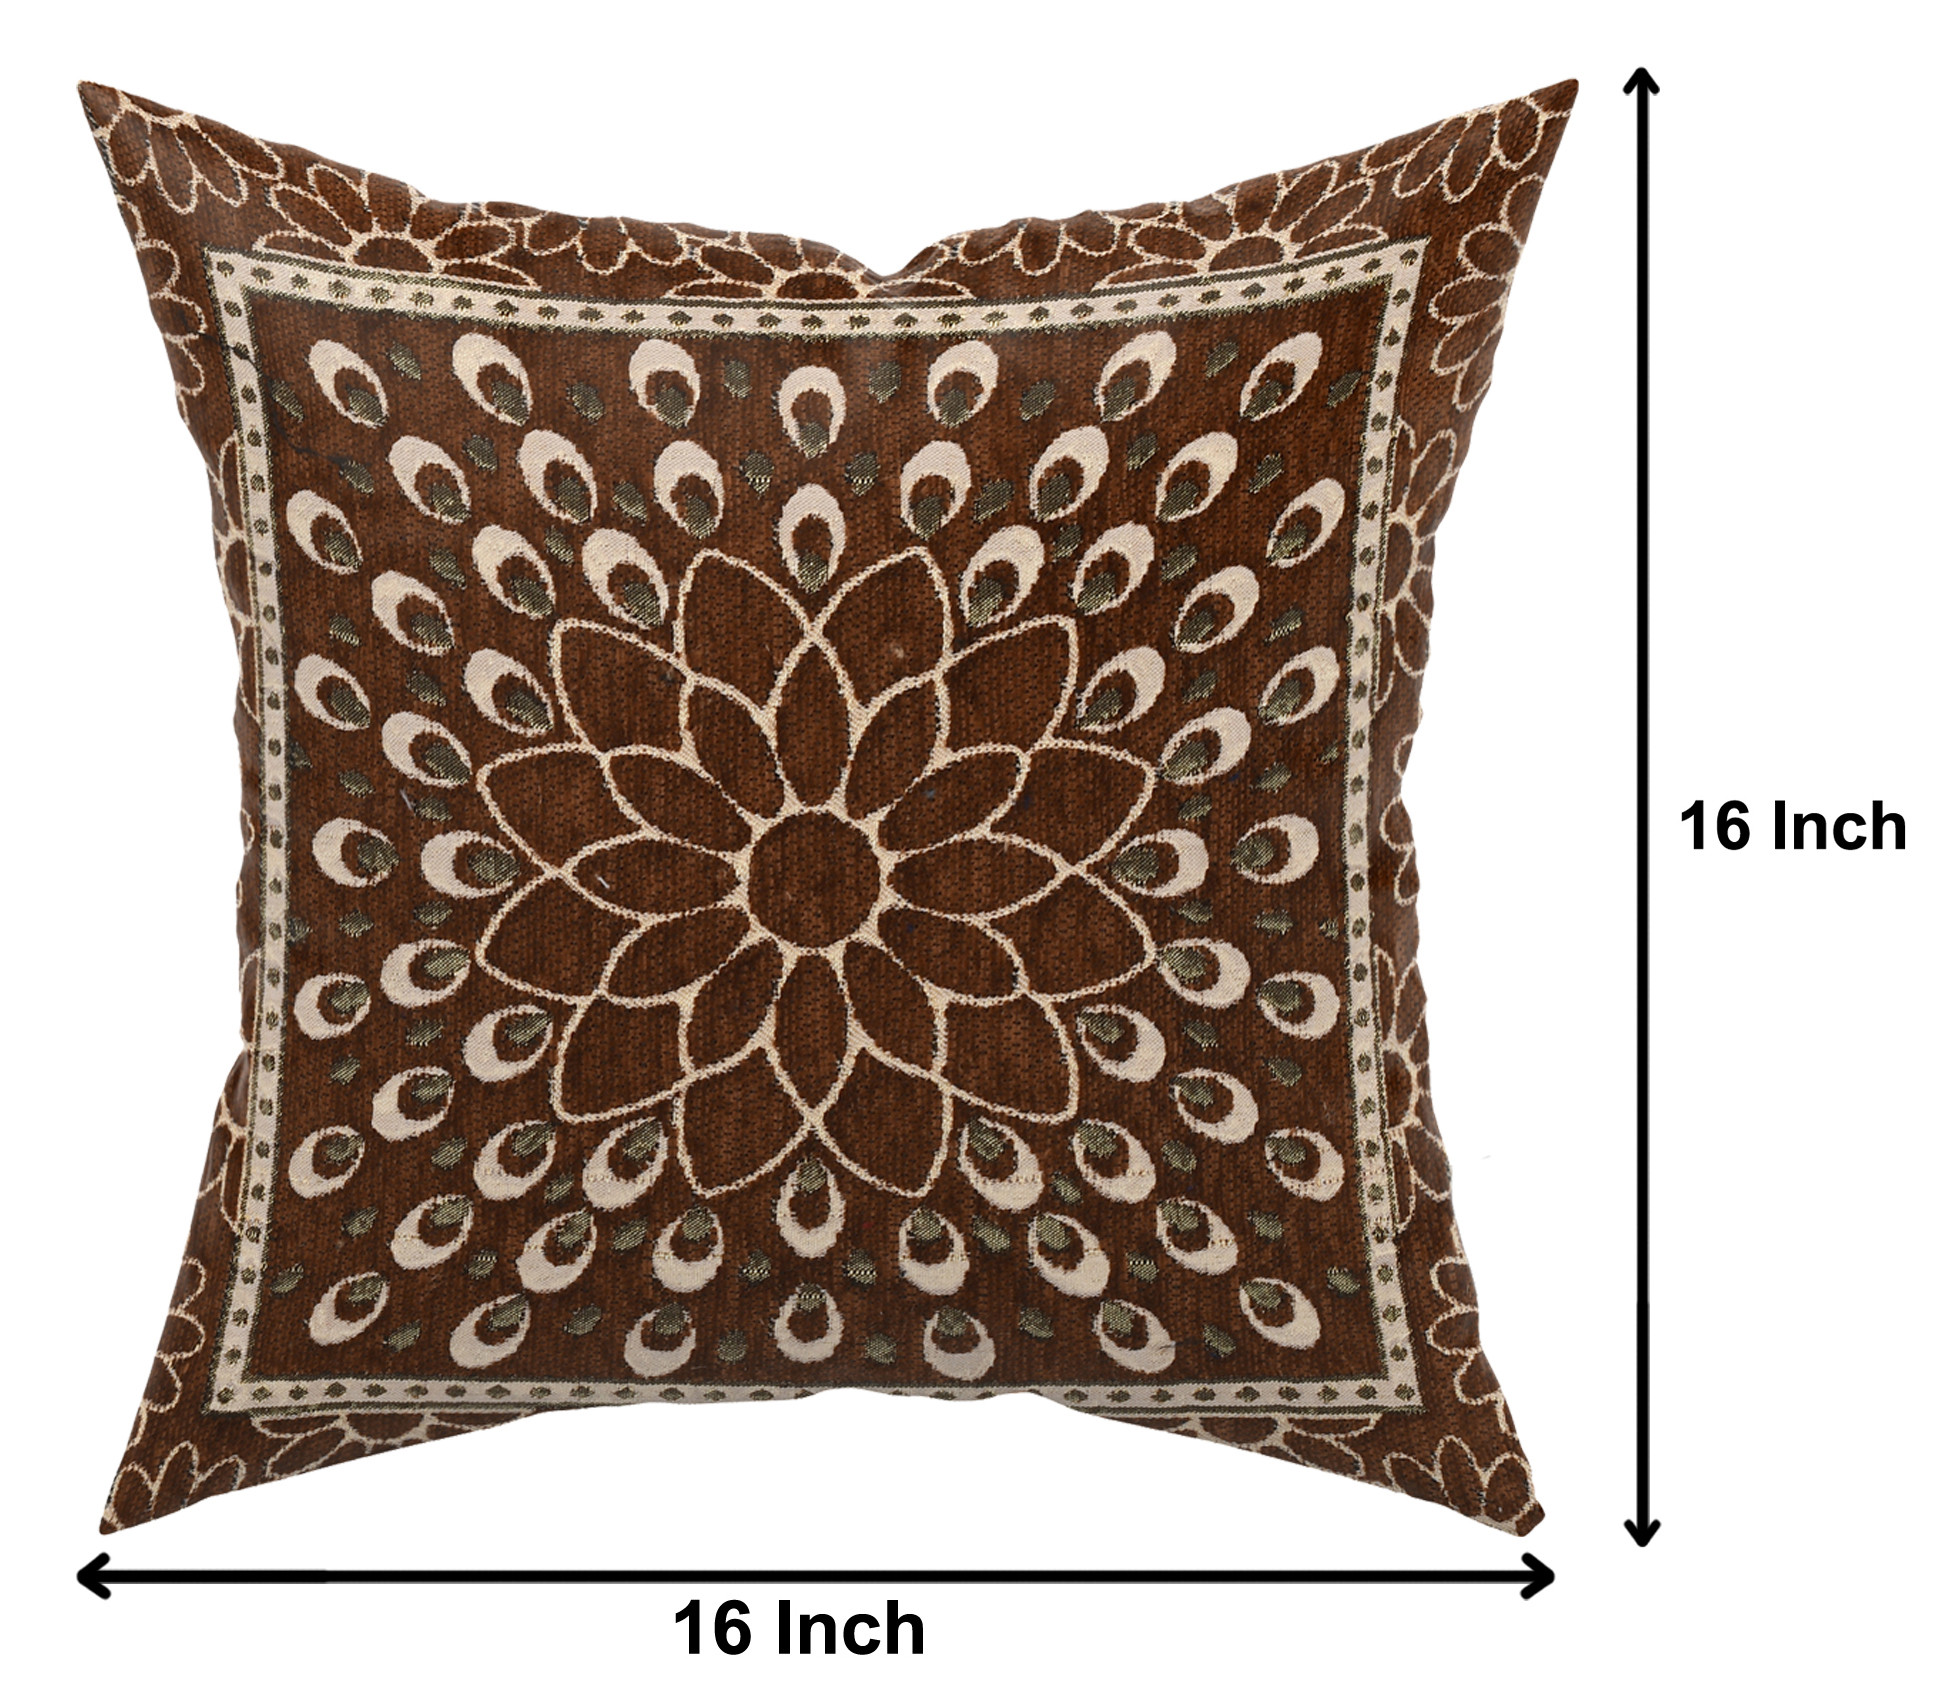 Kuber Industries Velvet Rangoli Design Soft Decorative Square Throw Pillow Cover, Cushion Covers, Pillow Case For Sofa Couch Bed Chair 16x16 Inch-(Brown)